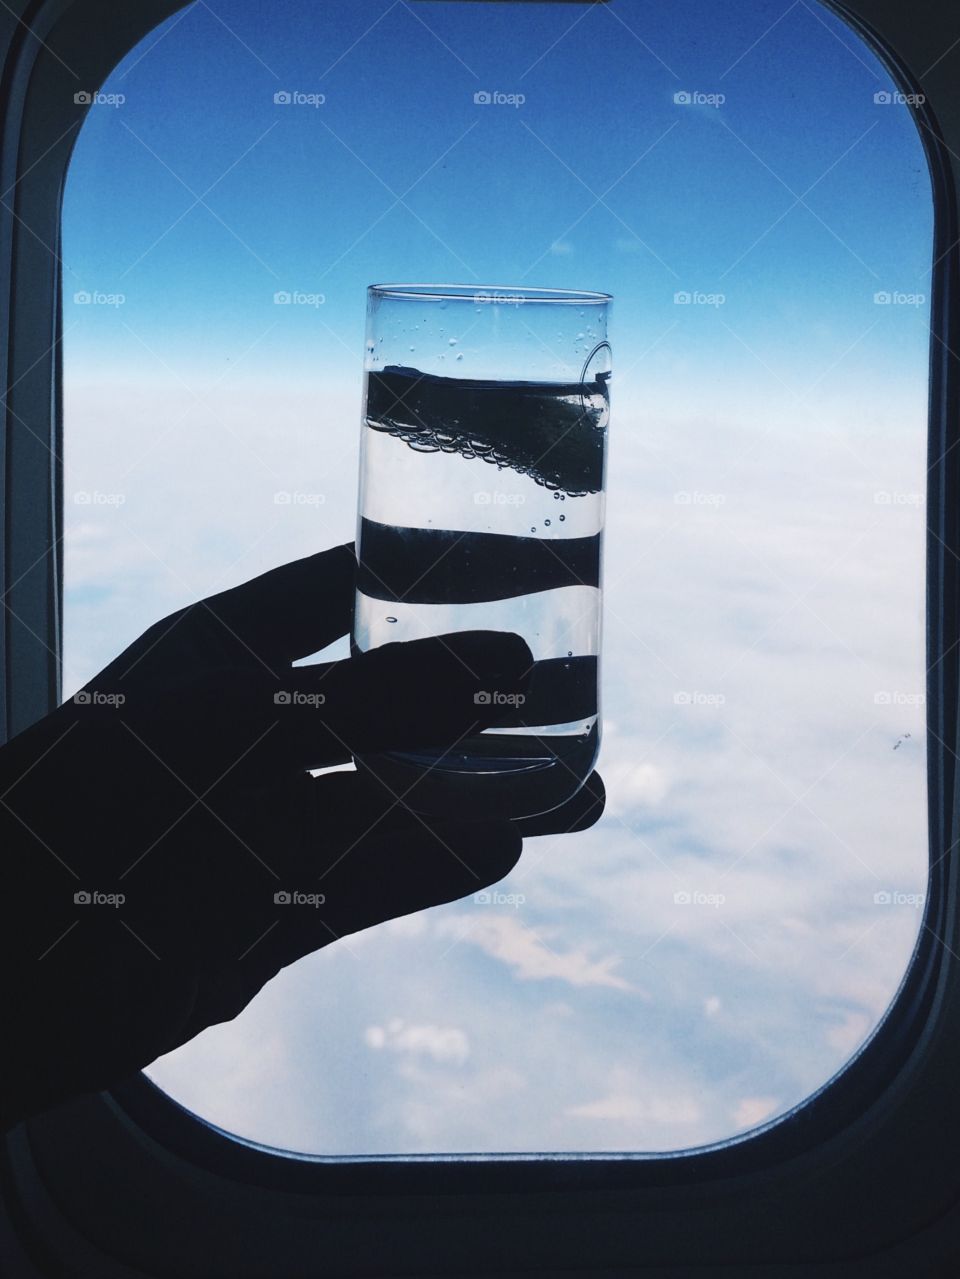 Hand holding glass of water